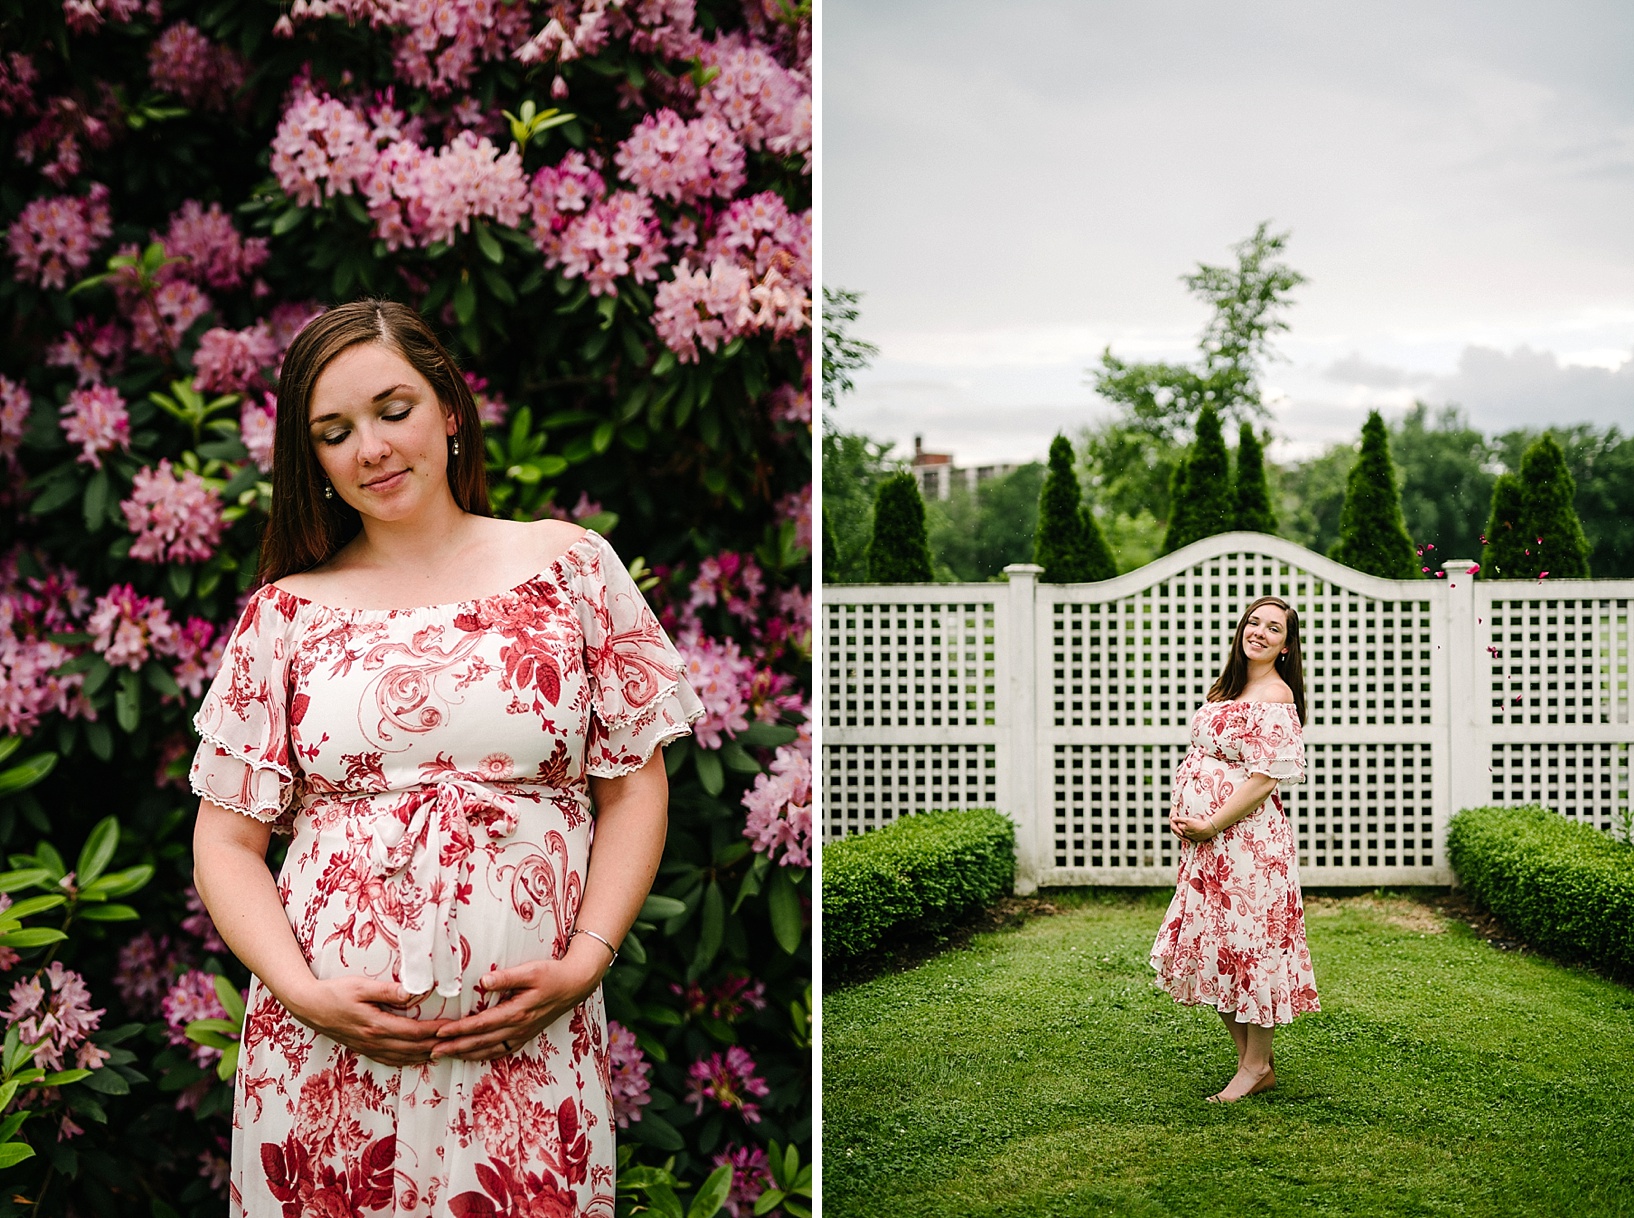 Pregnant woman in white and red floral dress holds her belly in front of a giant bush of pink flowers